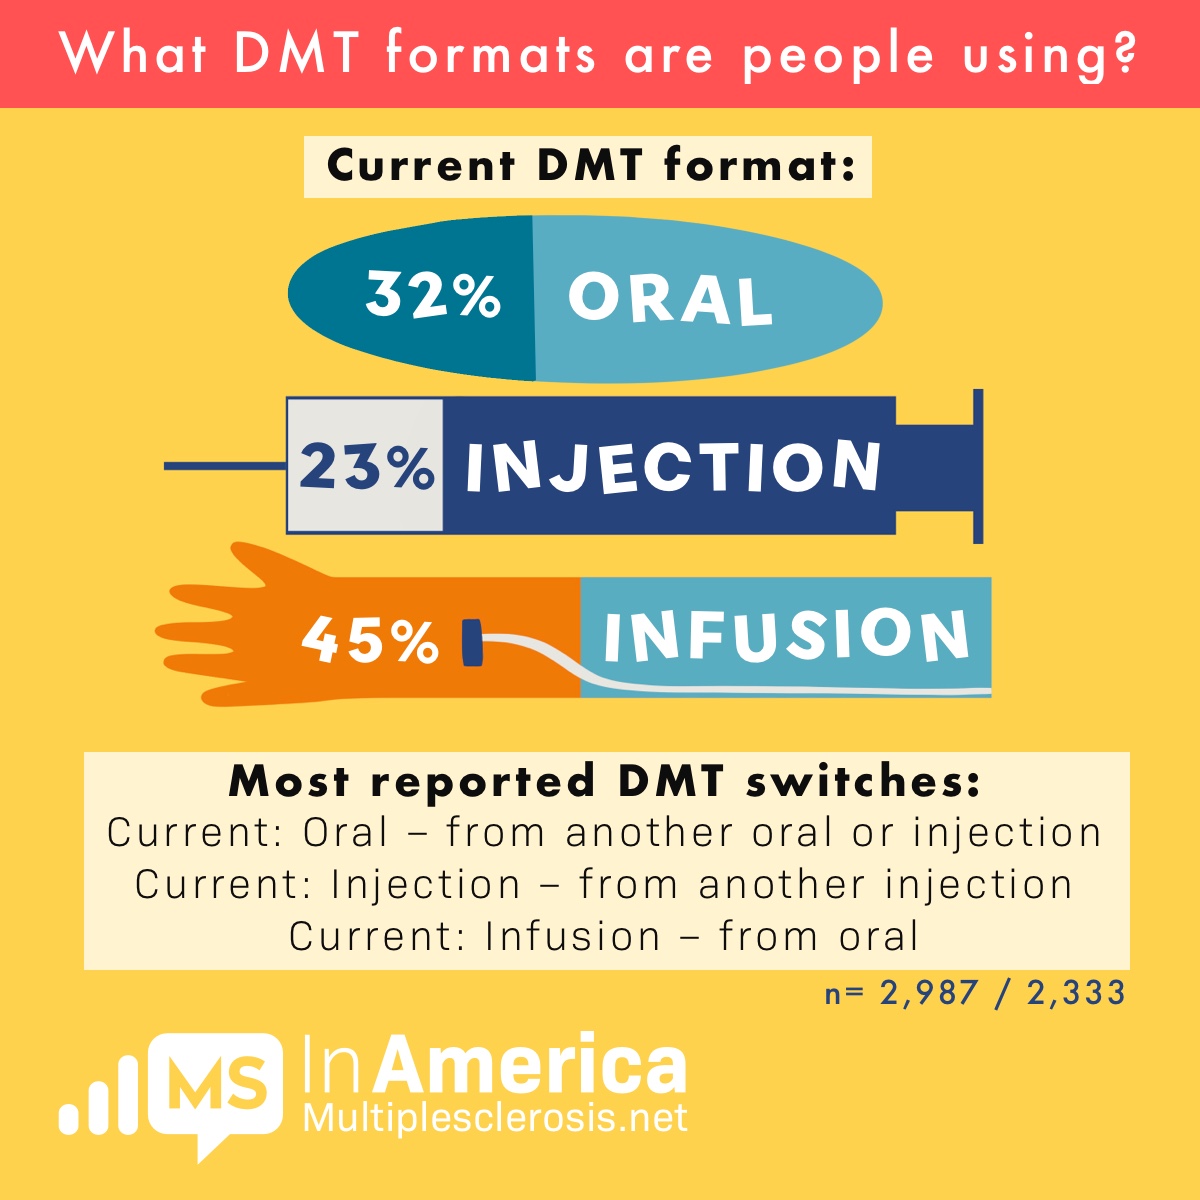 DMT use is Thirty-two percent of people oral twenty-three percent injection and forty-five percent infusion